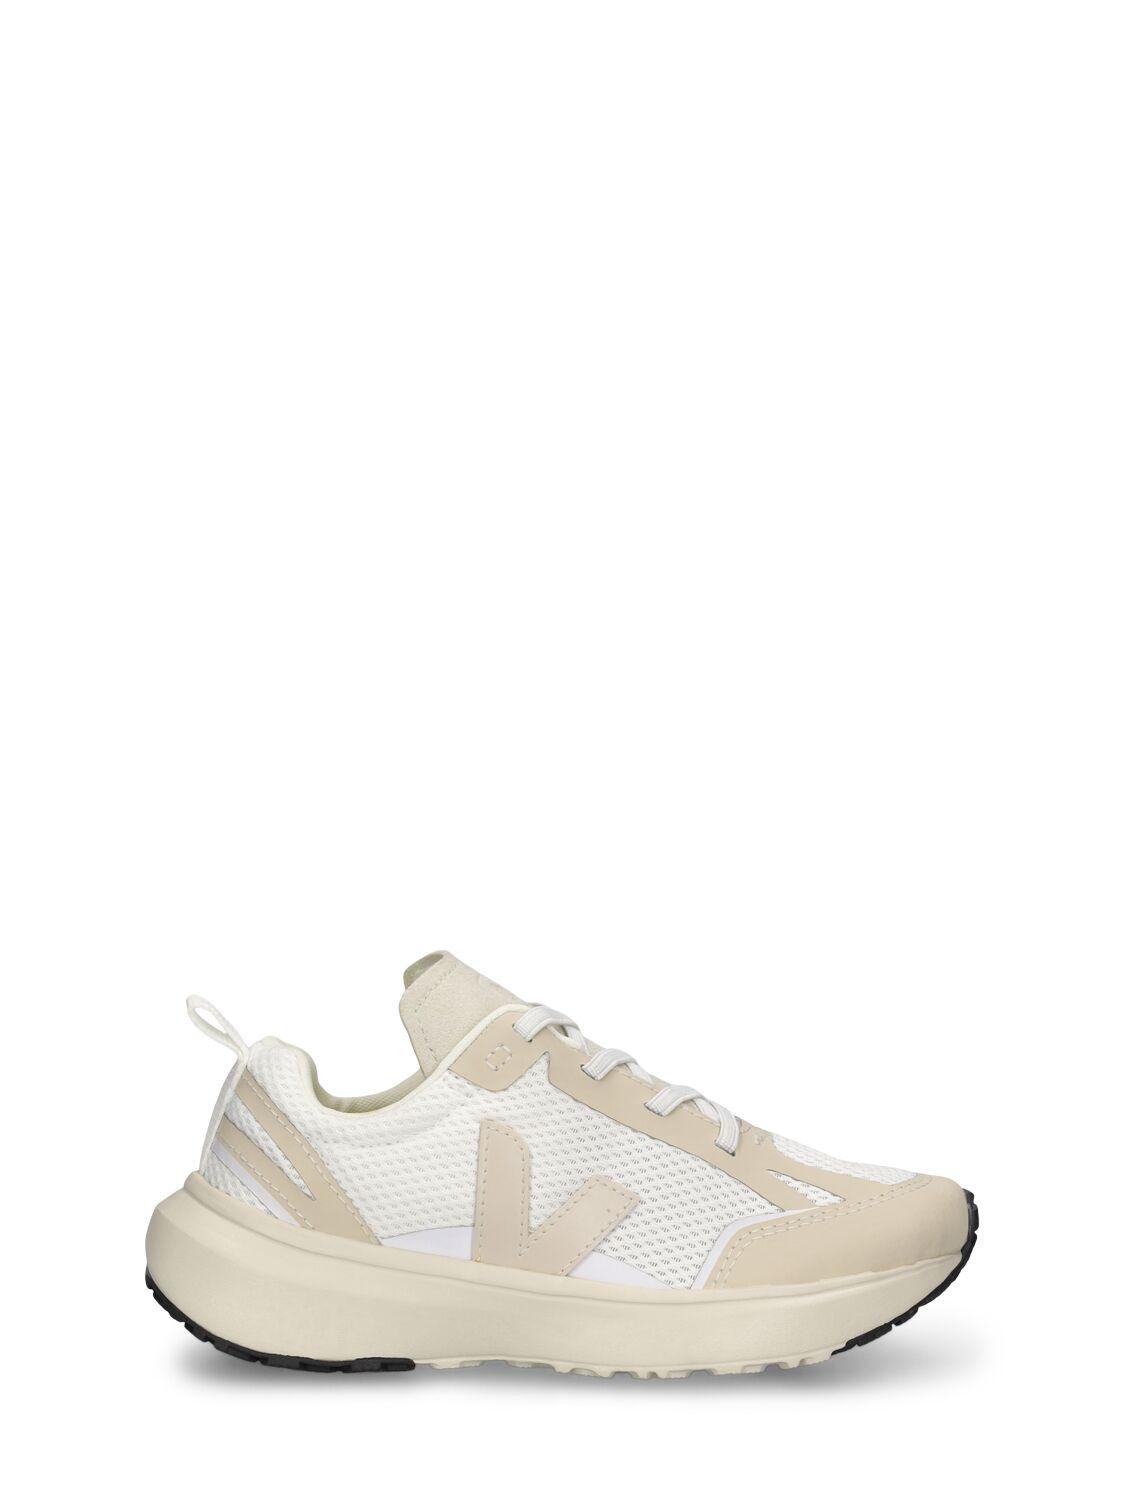 Canary Recycled Lace-up Sneakers by VEJA